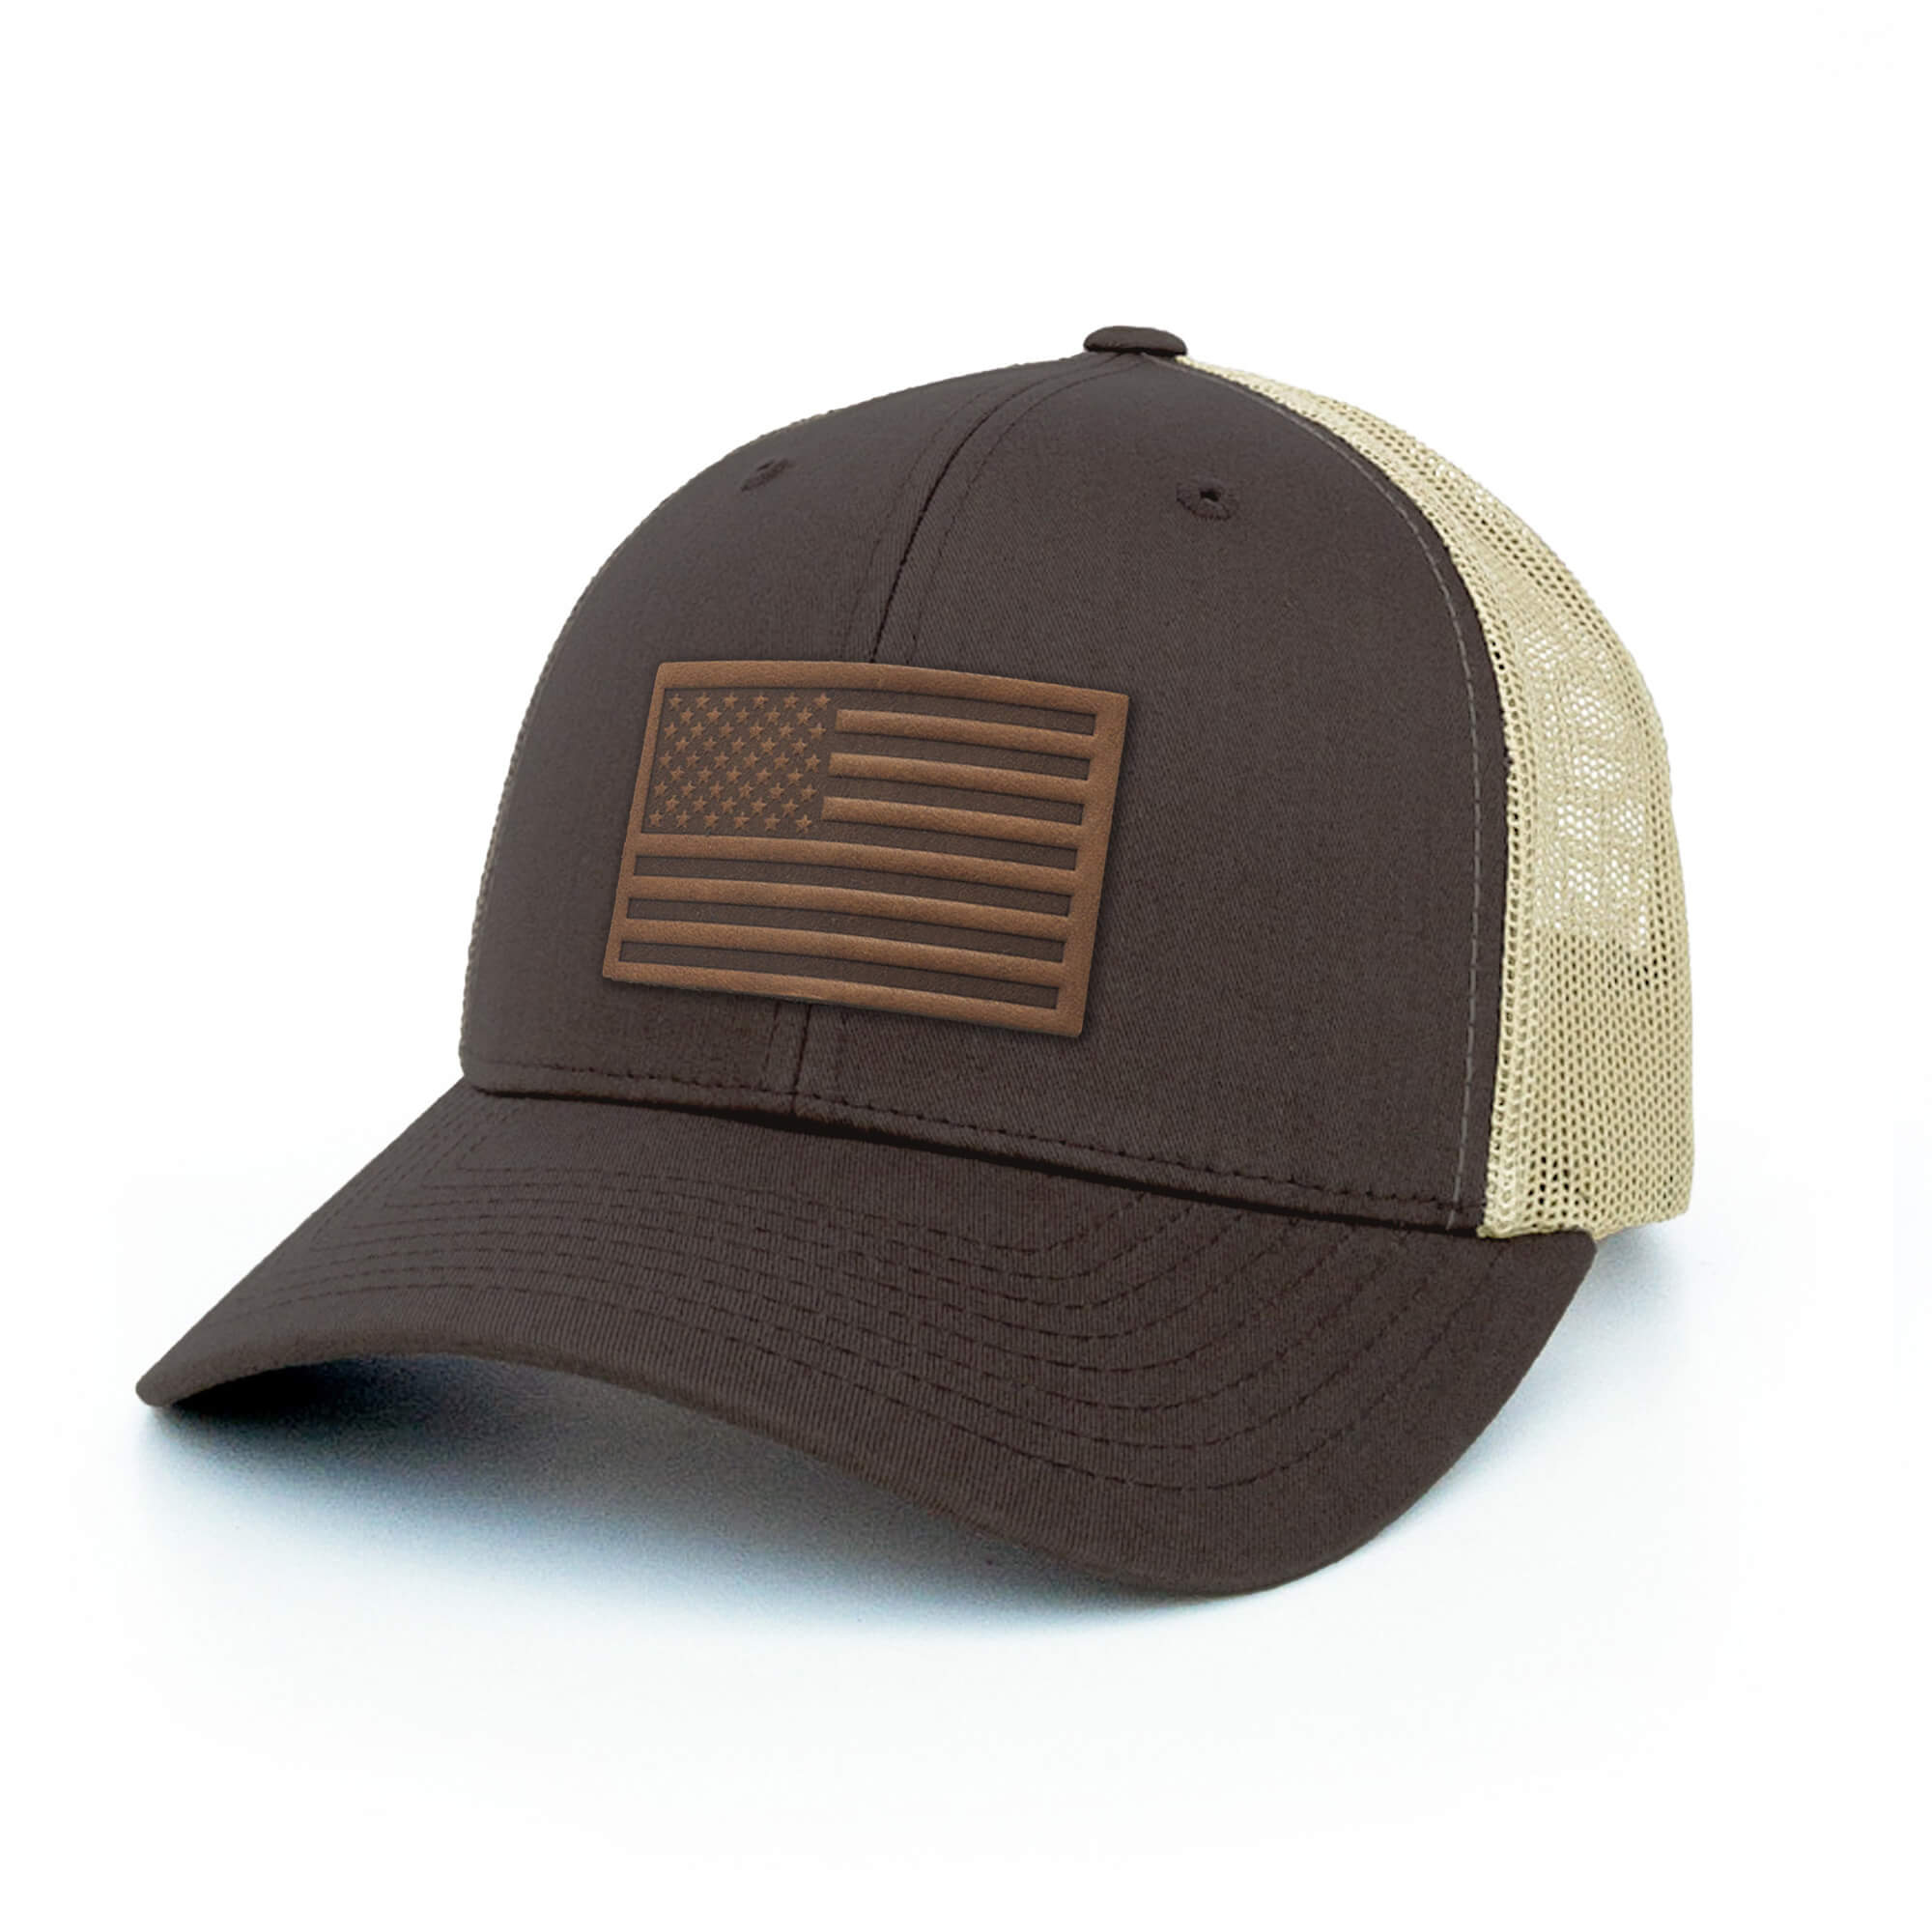 Navy trucker hat with full-grain leather patch of USA Flag | BLACK-003-012, CHARC-003-012, NAVY-003-012, HGREY-003-012, MOSS-003-012, BROWN-003-012